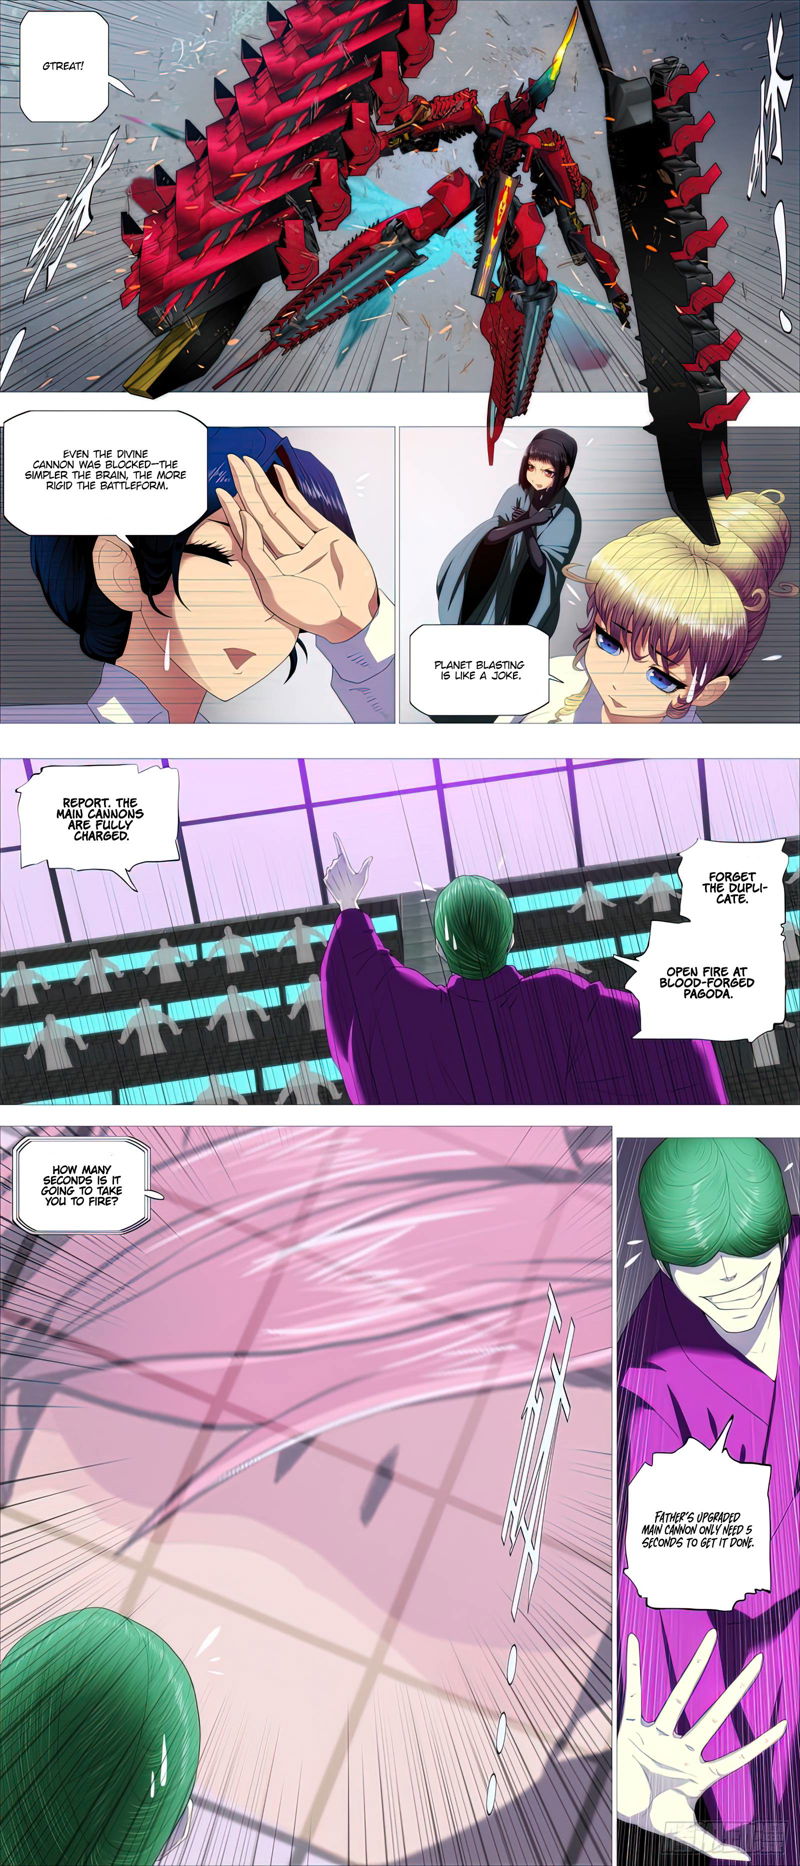 Iron Ladies Chapter 434 page 5